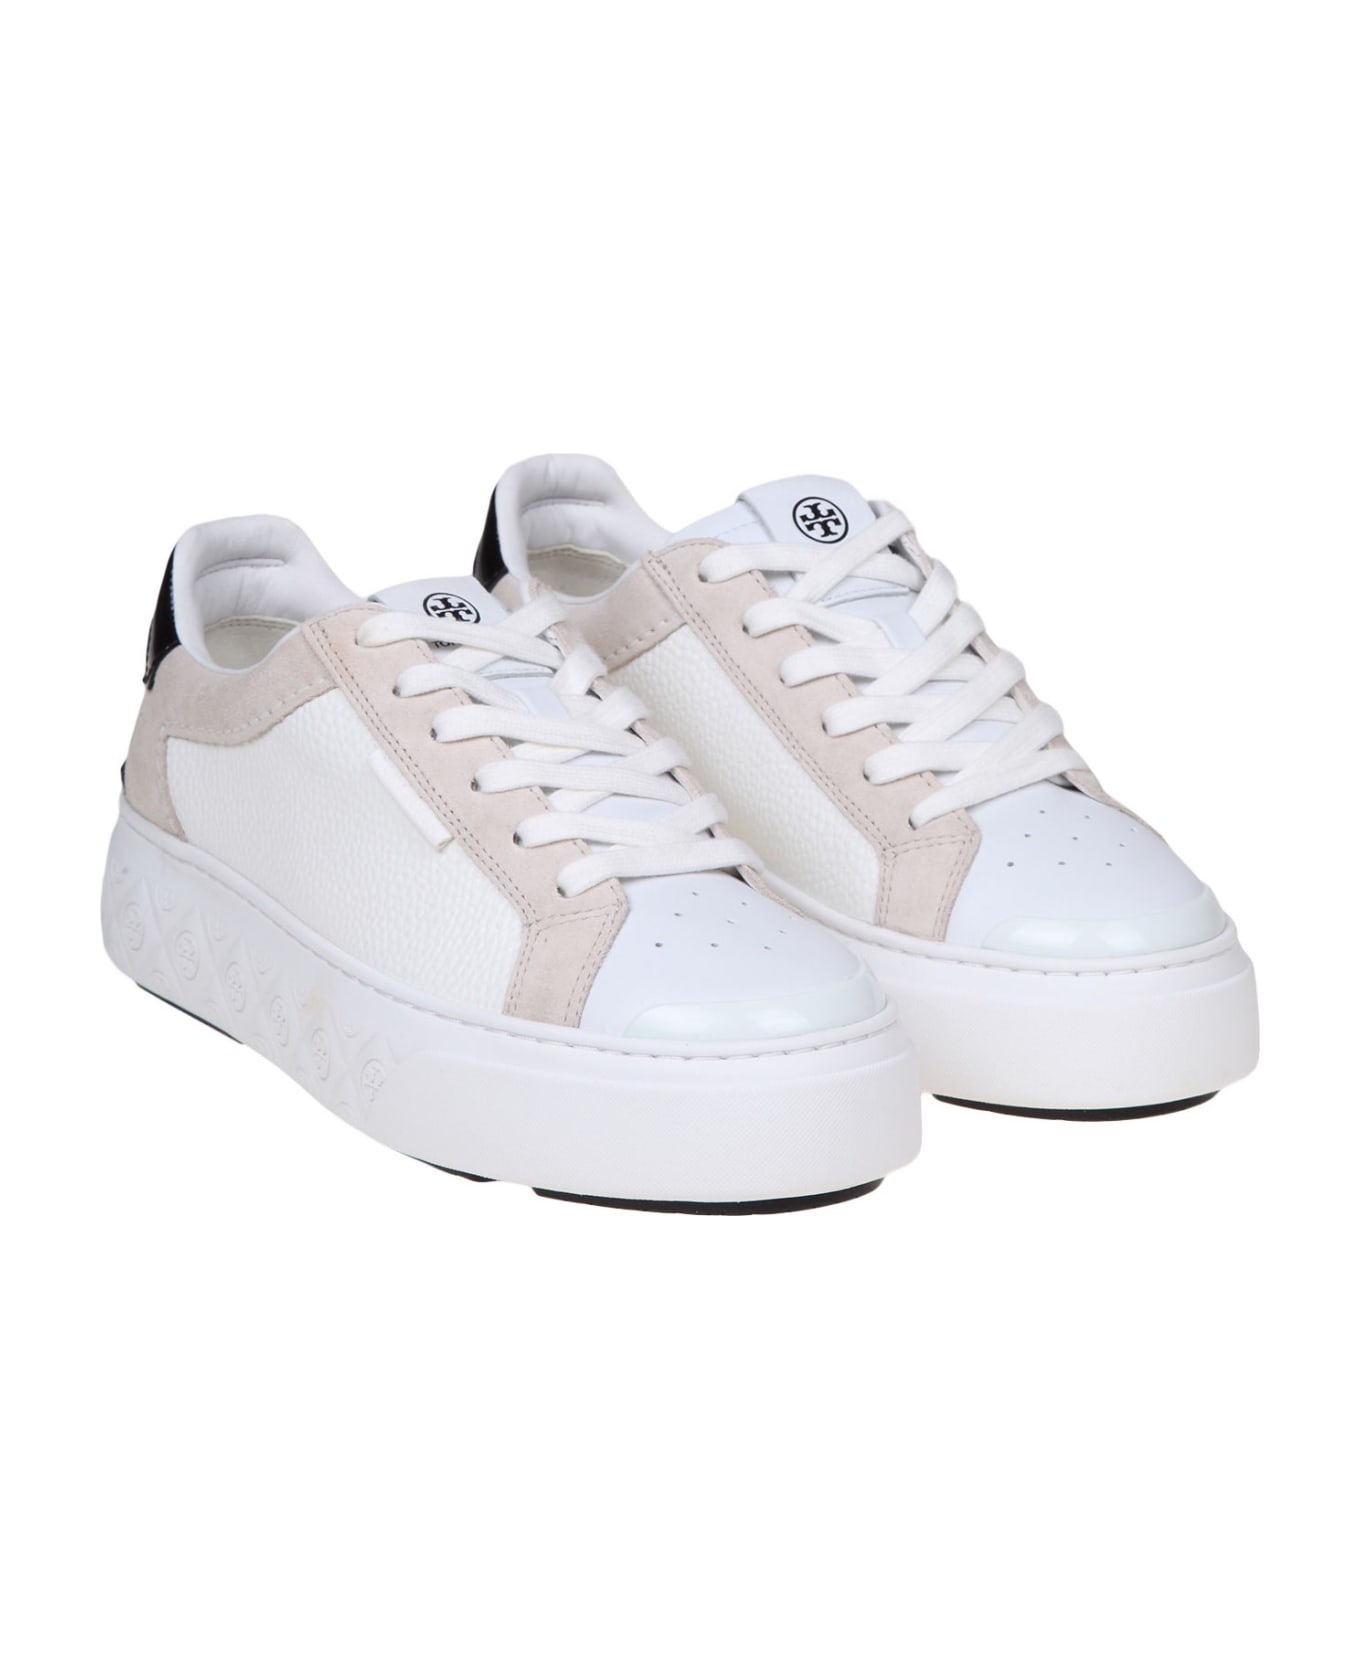 Tory Burch Ladybug Sneakers In White Suede And Leather - White/Black ウェッジシューズ